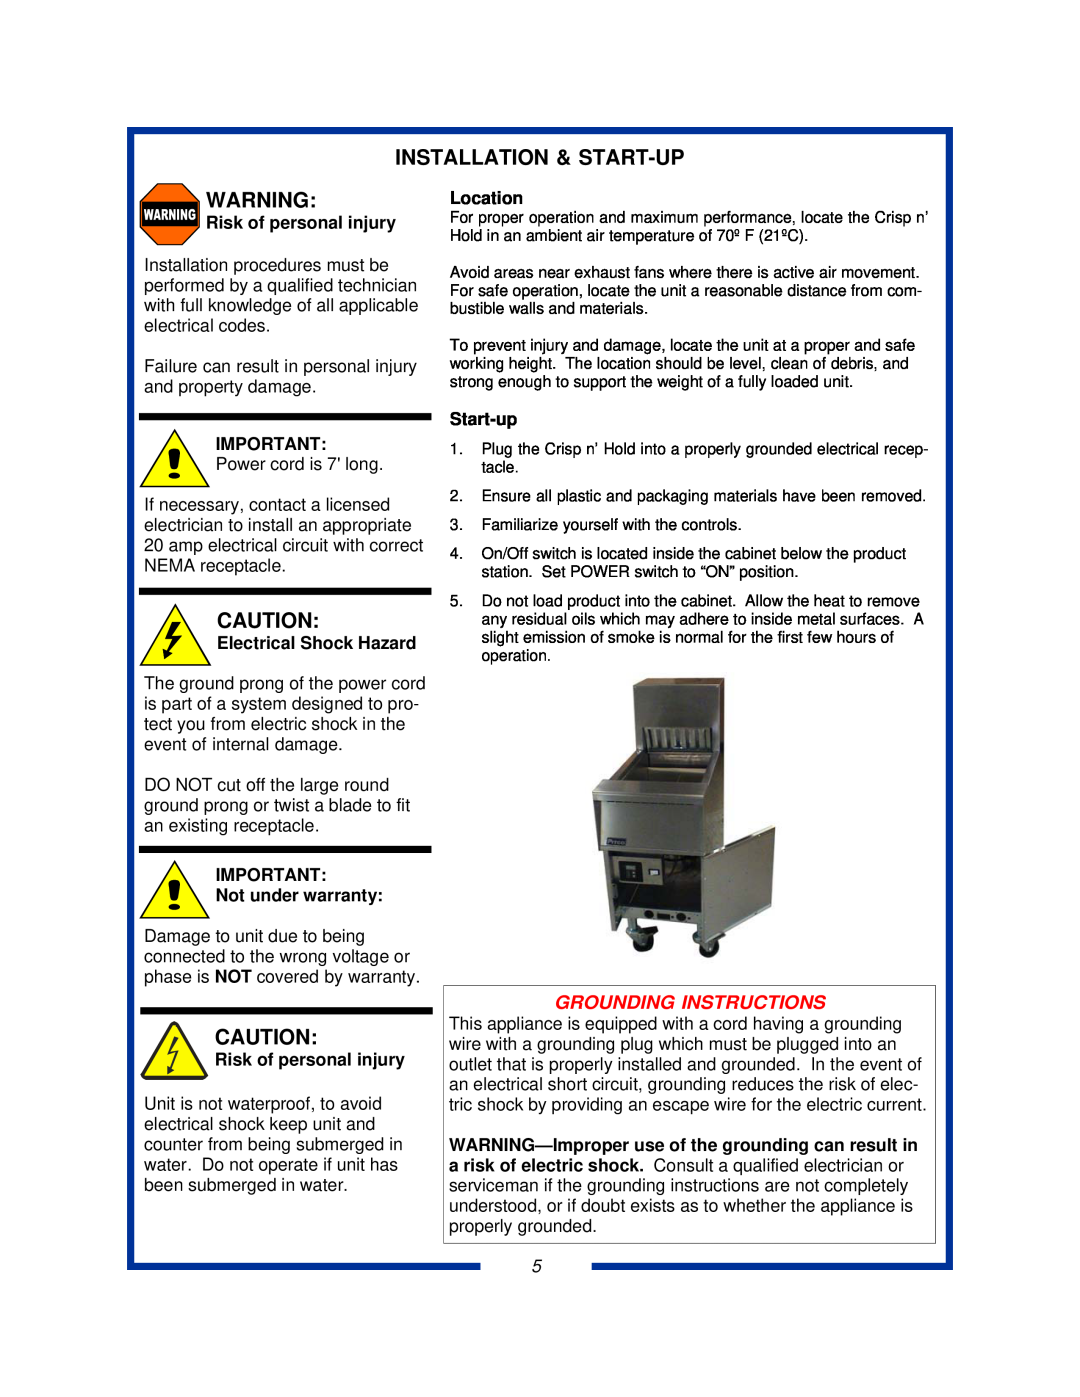 Pitco Frialator PCF18 Installation & Start-Up, Grounding Instructions, Risk of personal injury, Electrical Shock Hazard 